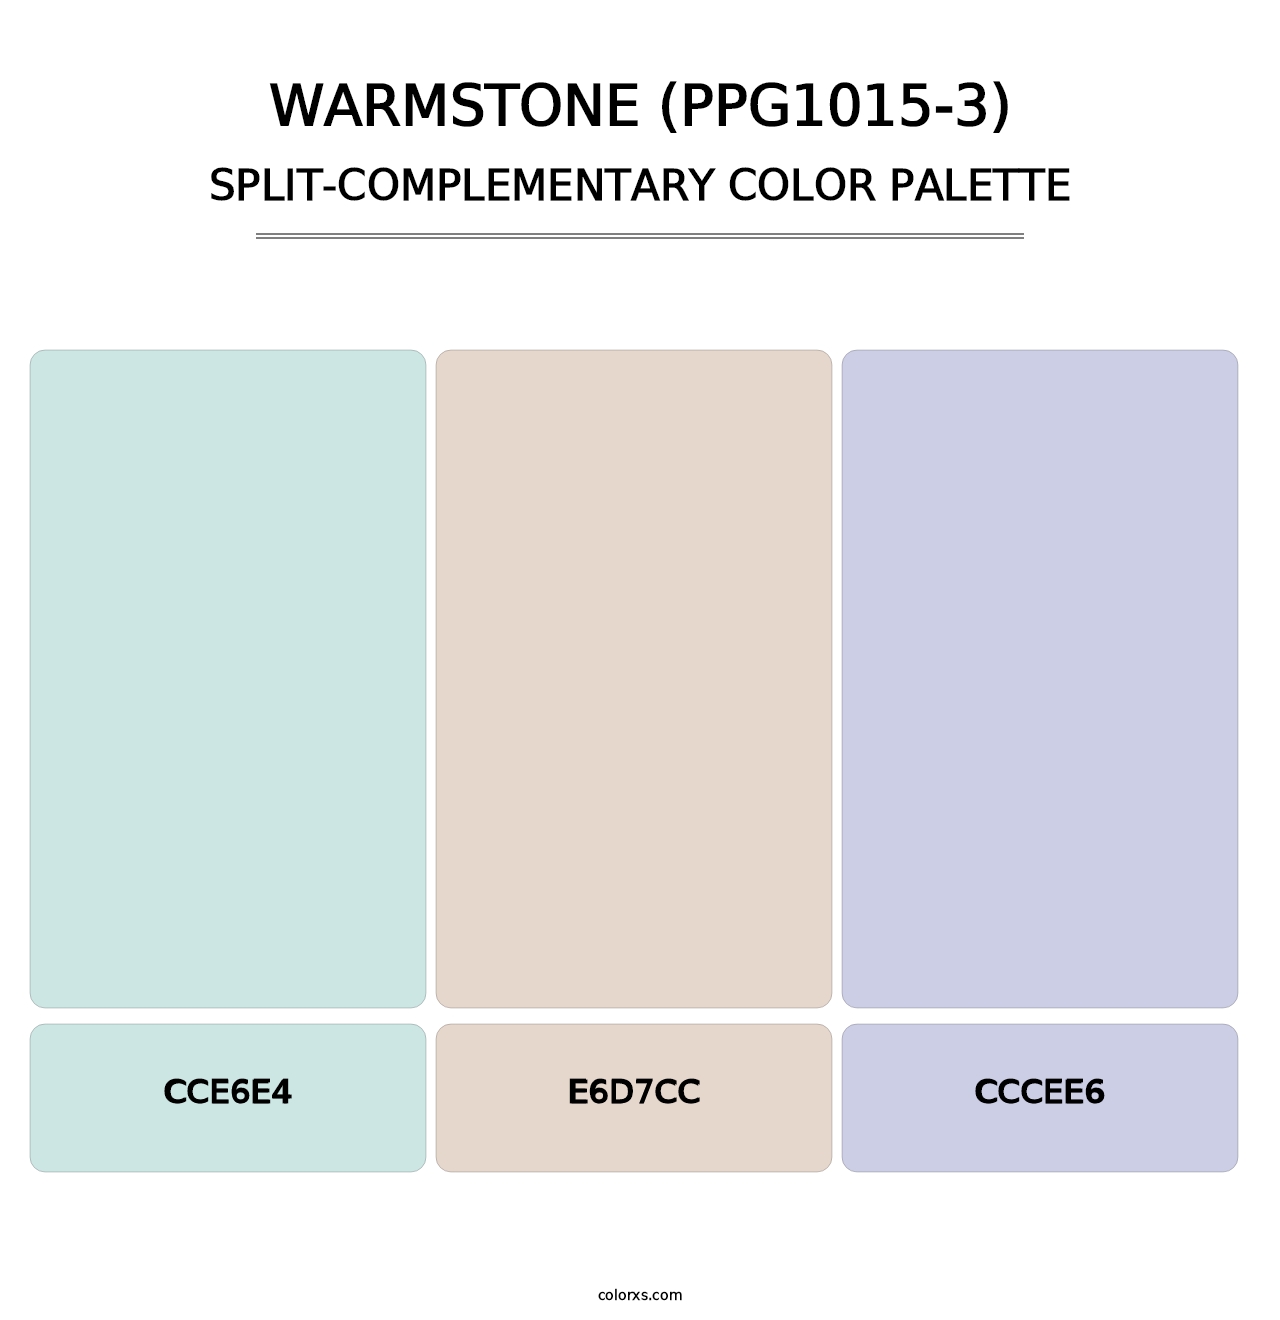 Warmstone (PPG1015-3) - Split-Complementary Color Palette